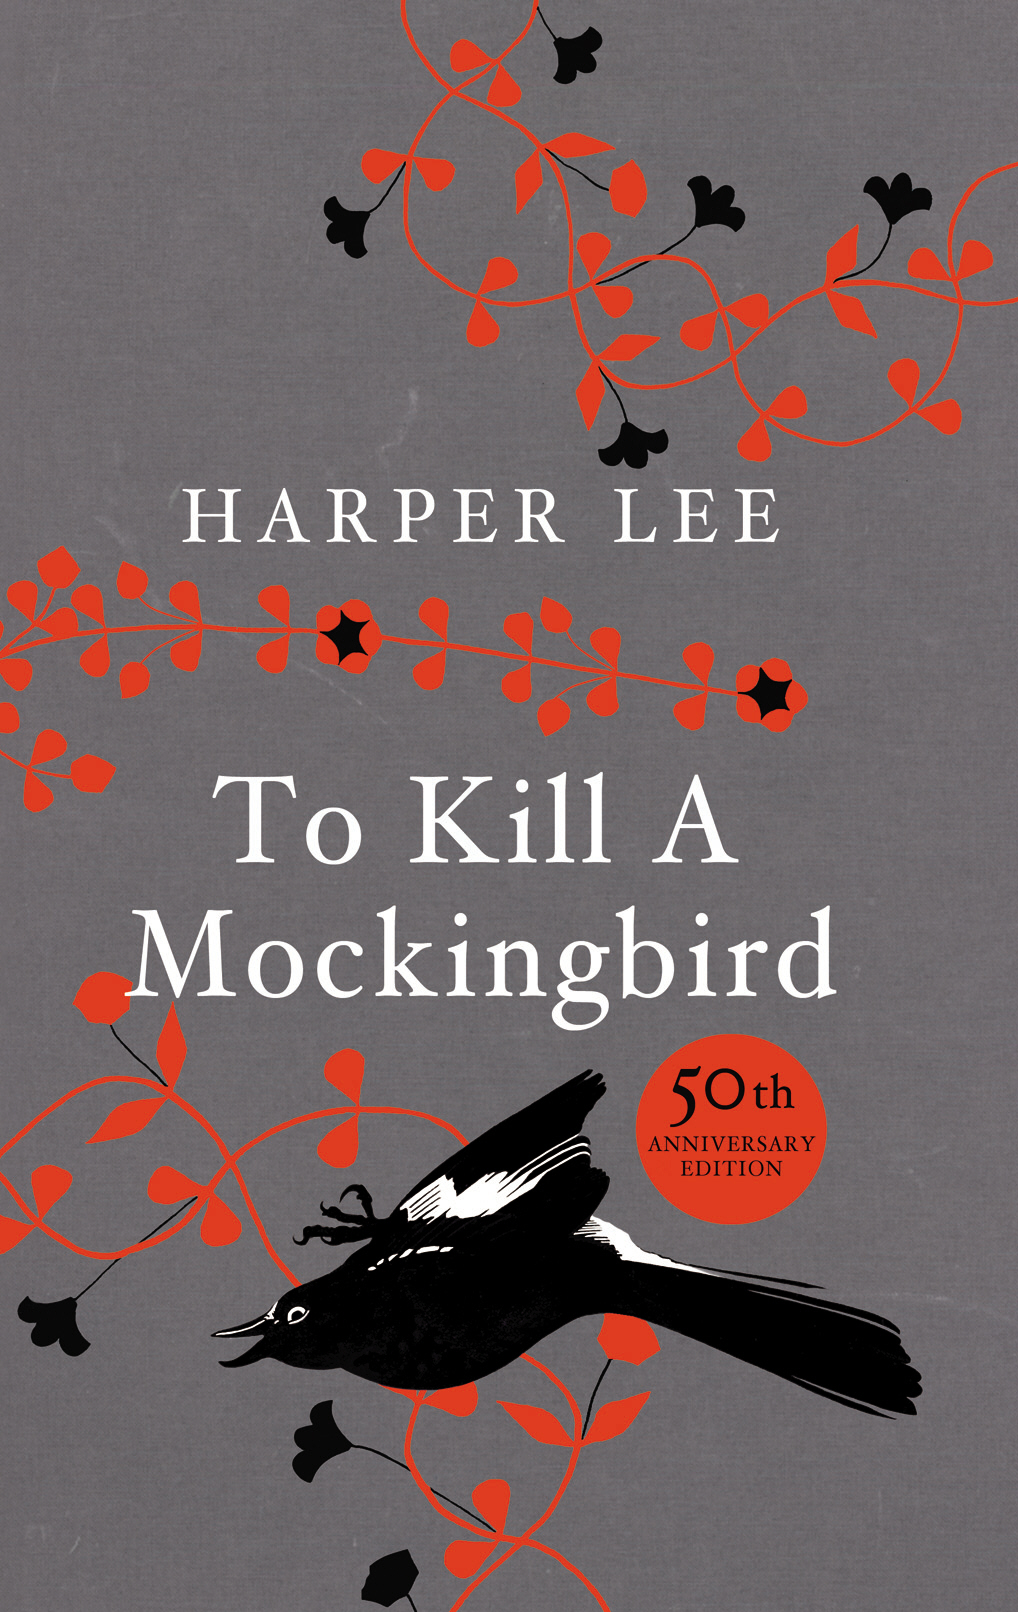 To Kill a Mockingbird, by Harper Lee. 
                              
                              
                              
                              Scout Finch grows up in the racially charged Depression-era South where her father, the lawyer Atticus Finch, is defending a black man accused of raping a young white woman.
                              
                              
                              
                              Buy now: To Kill a Mockingbird